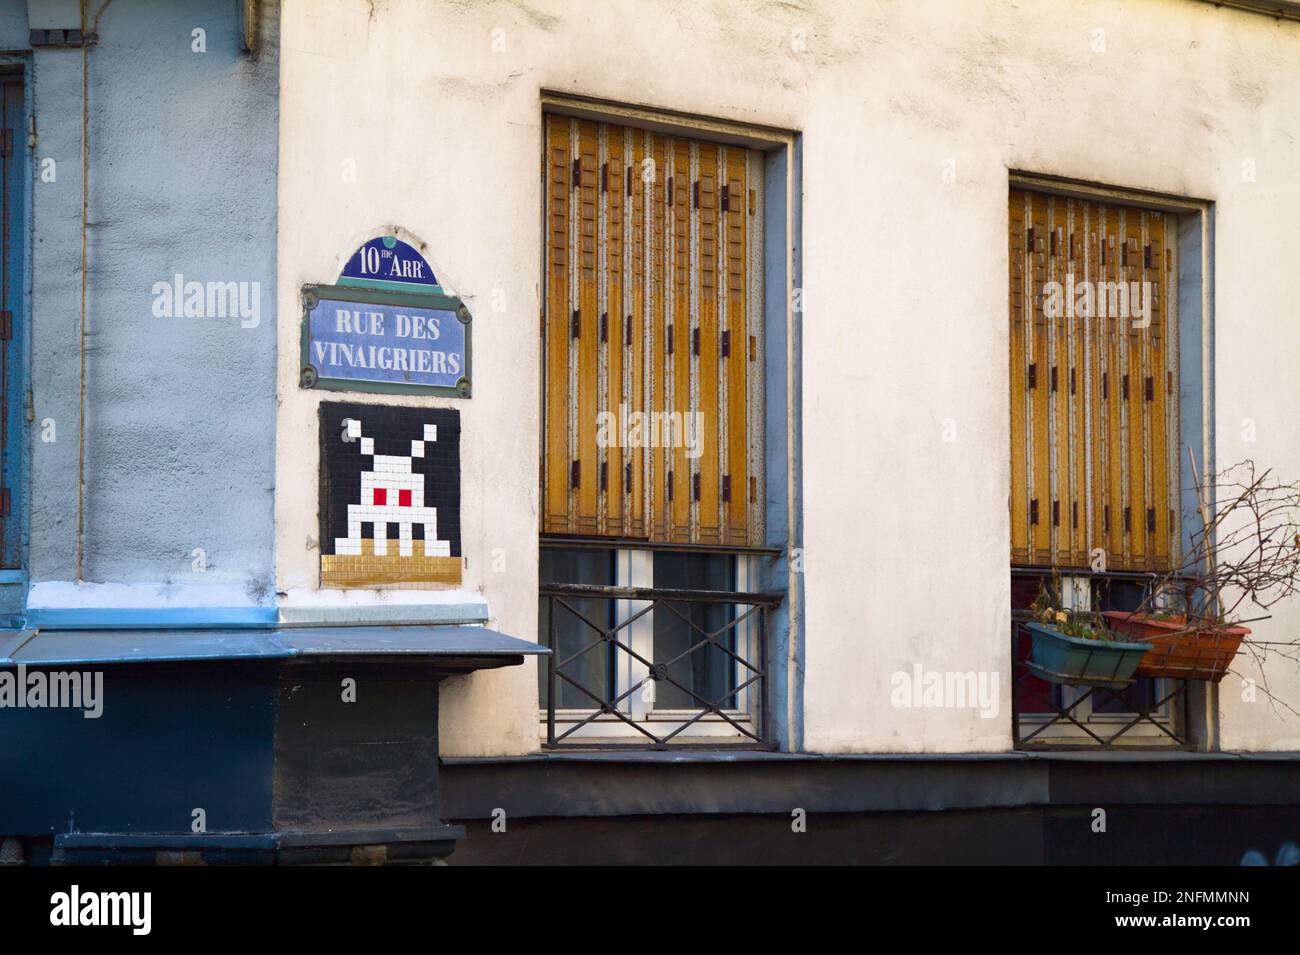 Street View Of The Corner Of Rue des Vinaigriers With A Space Invader Tile Mosaic, Graffiti And A Shuttered Window, Paris France Stock Photo